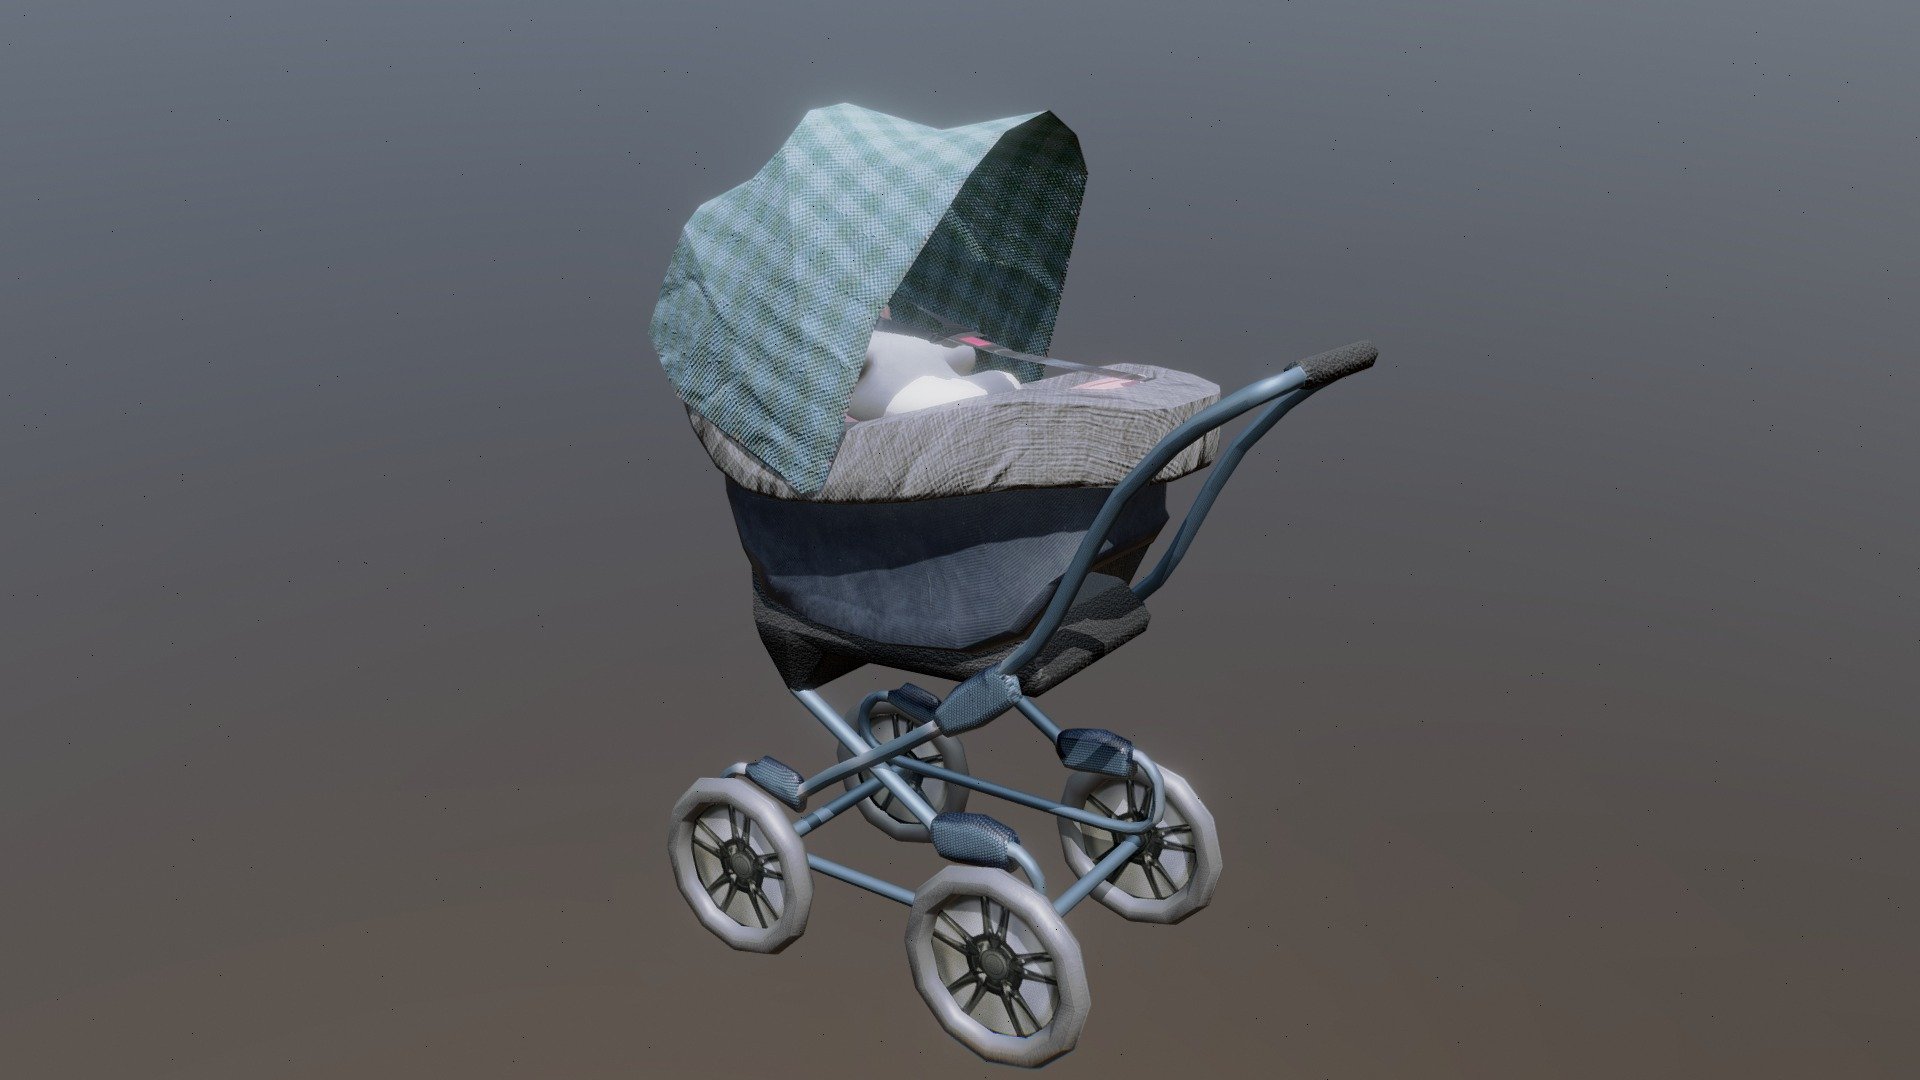 A midpoly baby stroller, intended for demanding scenes of big crowds of people or mobile games. In case you need to cut extra topology, you can easily remove the baby model and leave the cart alone. PBR textures, including an alpha channel for the wheels and belt transparency 3d model